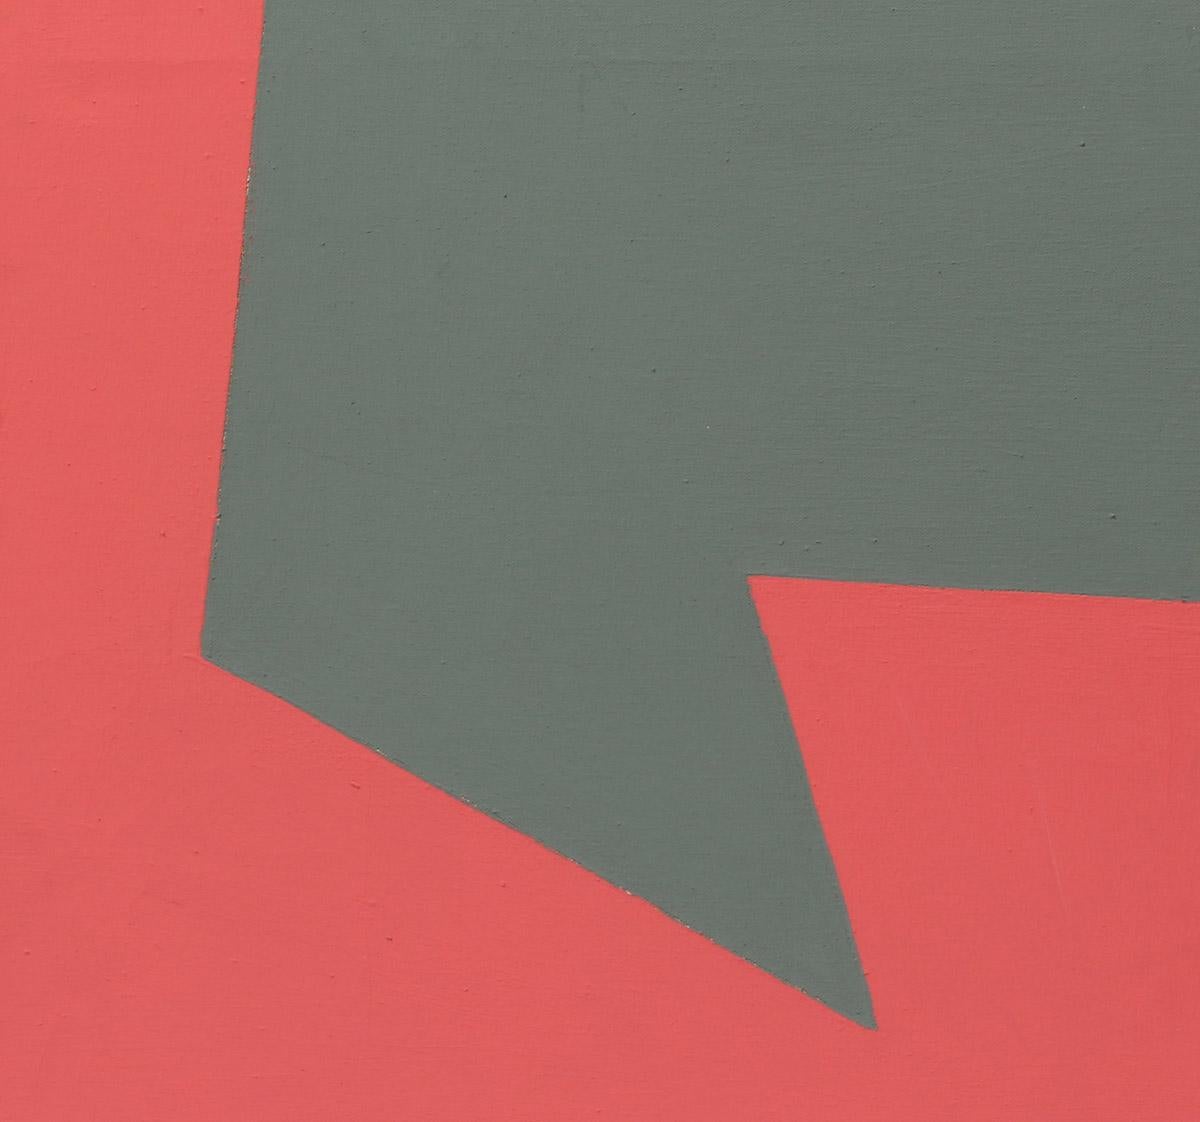 Minimalist Painting New York American Artist Female Grey Red 1975 - Gray Abstract Painting by Martica Miguens